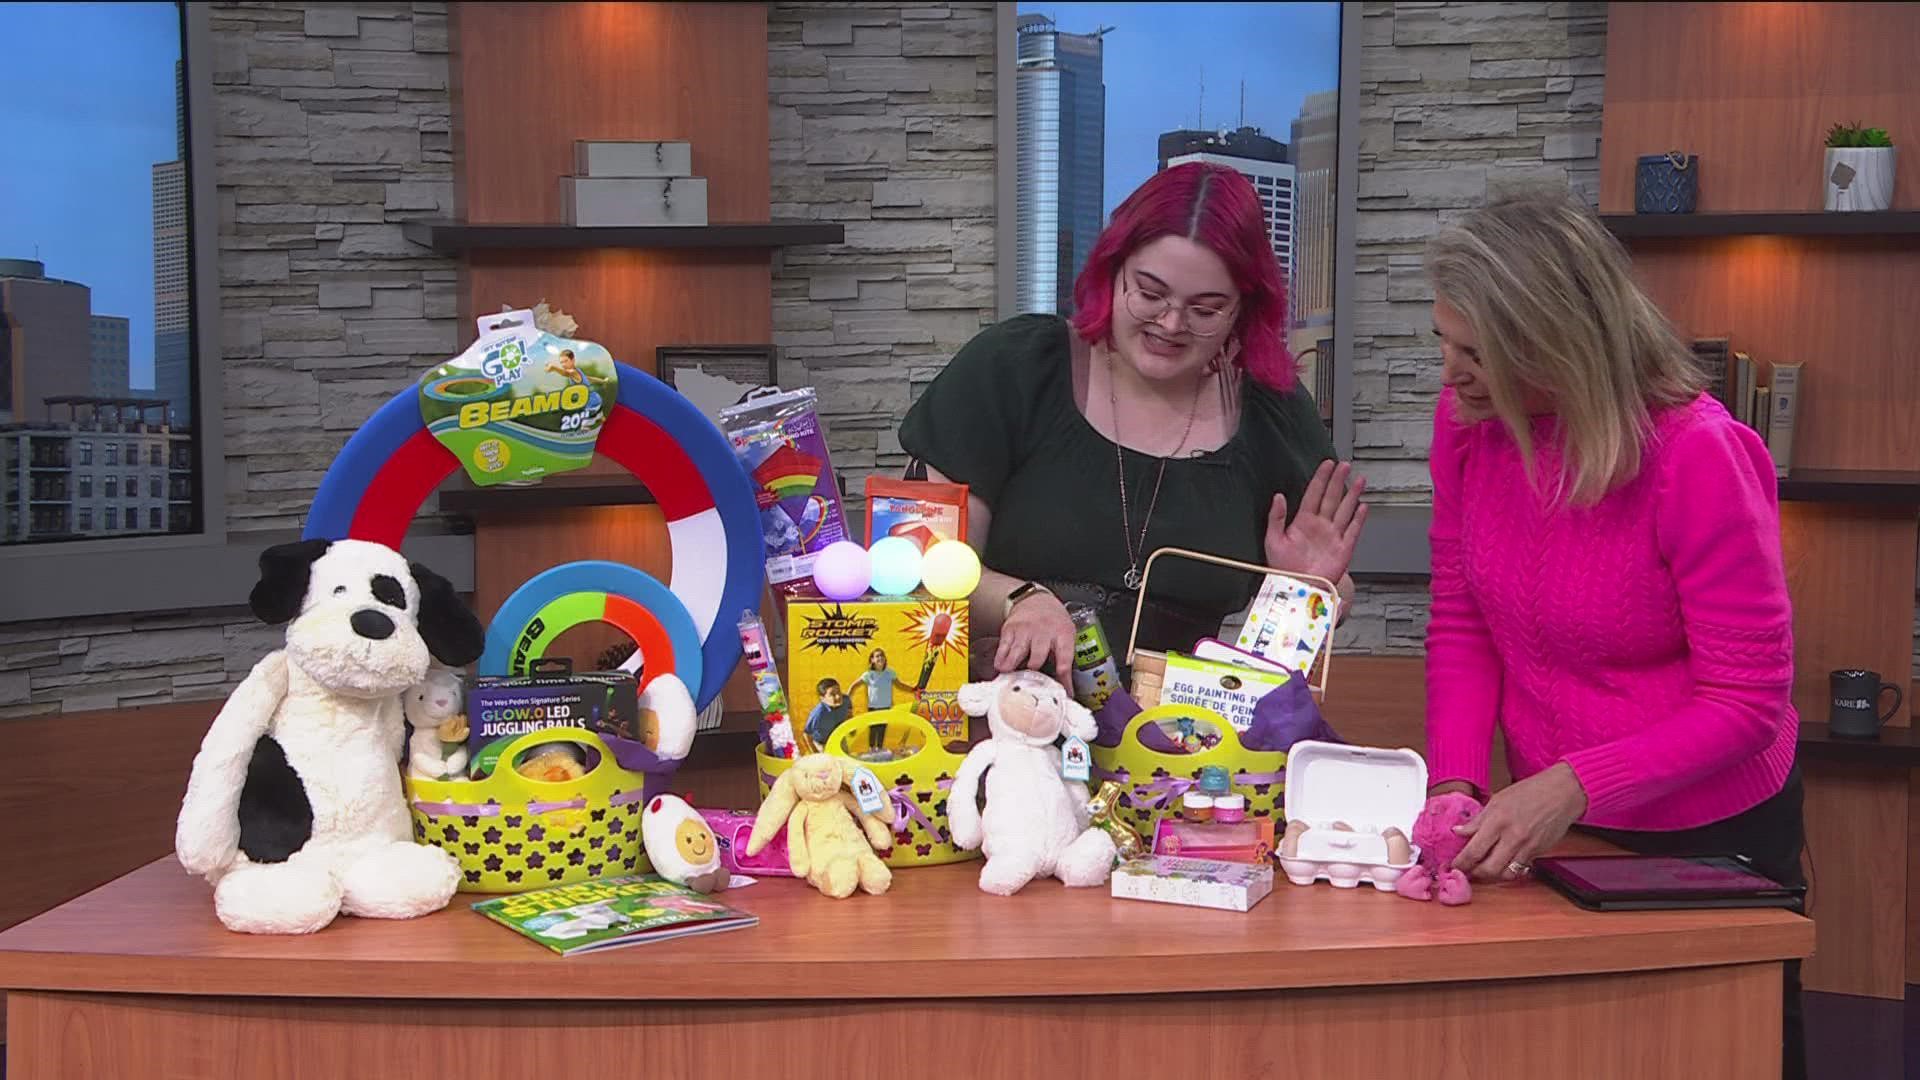 Second-generation store operator Abby Adelsheim-Marshall joins KARE 11 News Saturday to share some ideas for Easter.